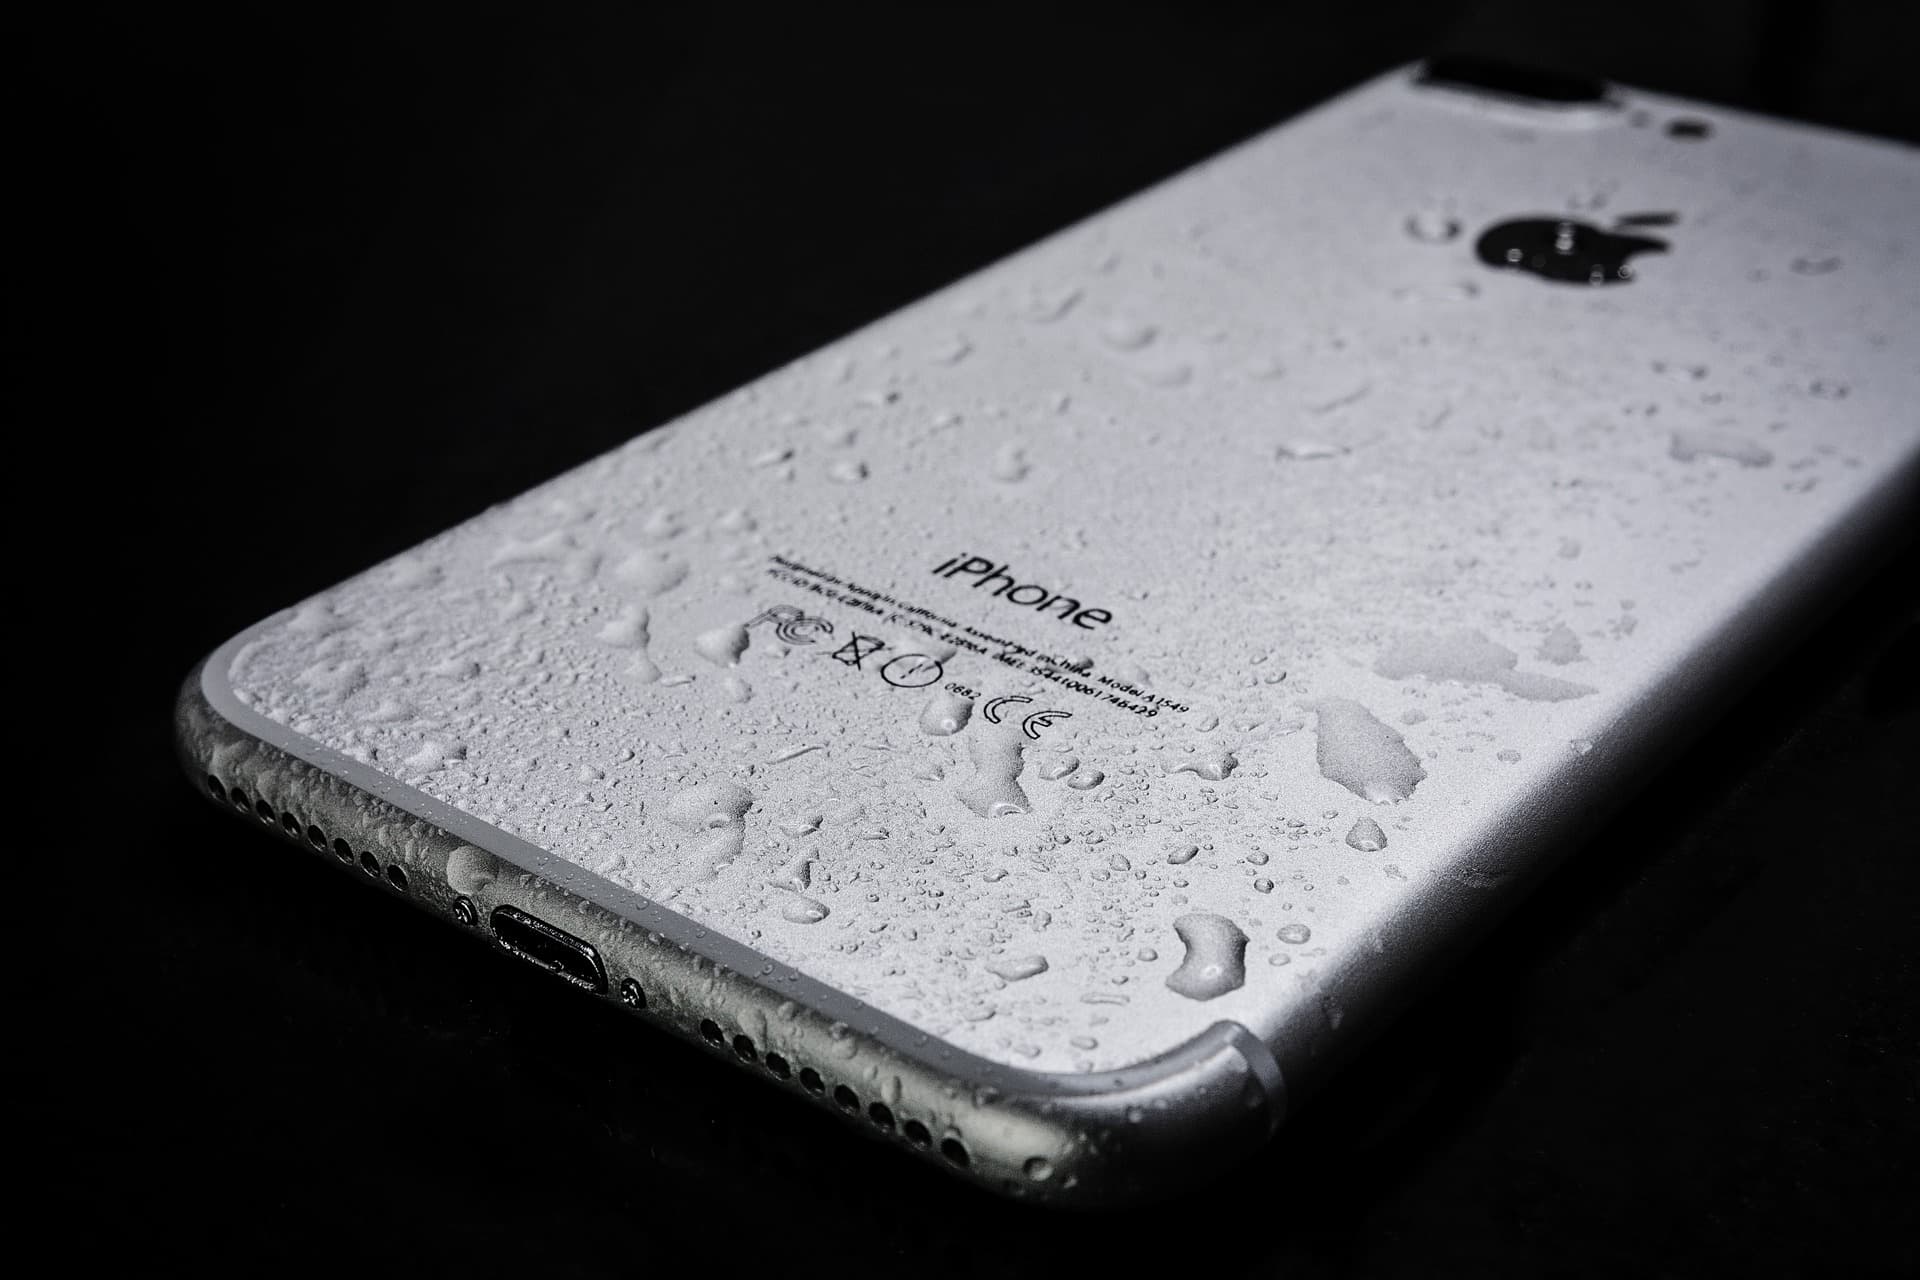 Wet iPhone with water droplets